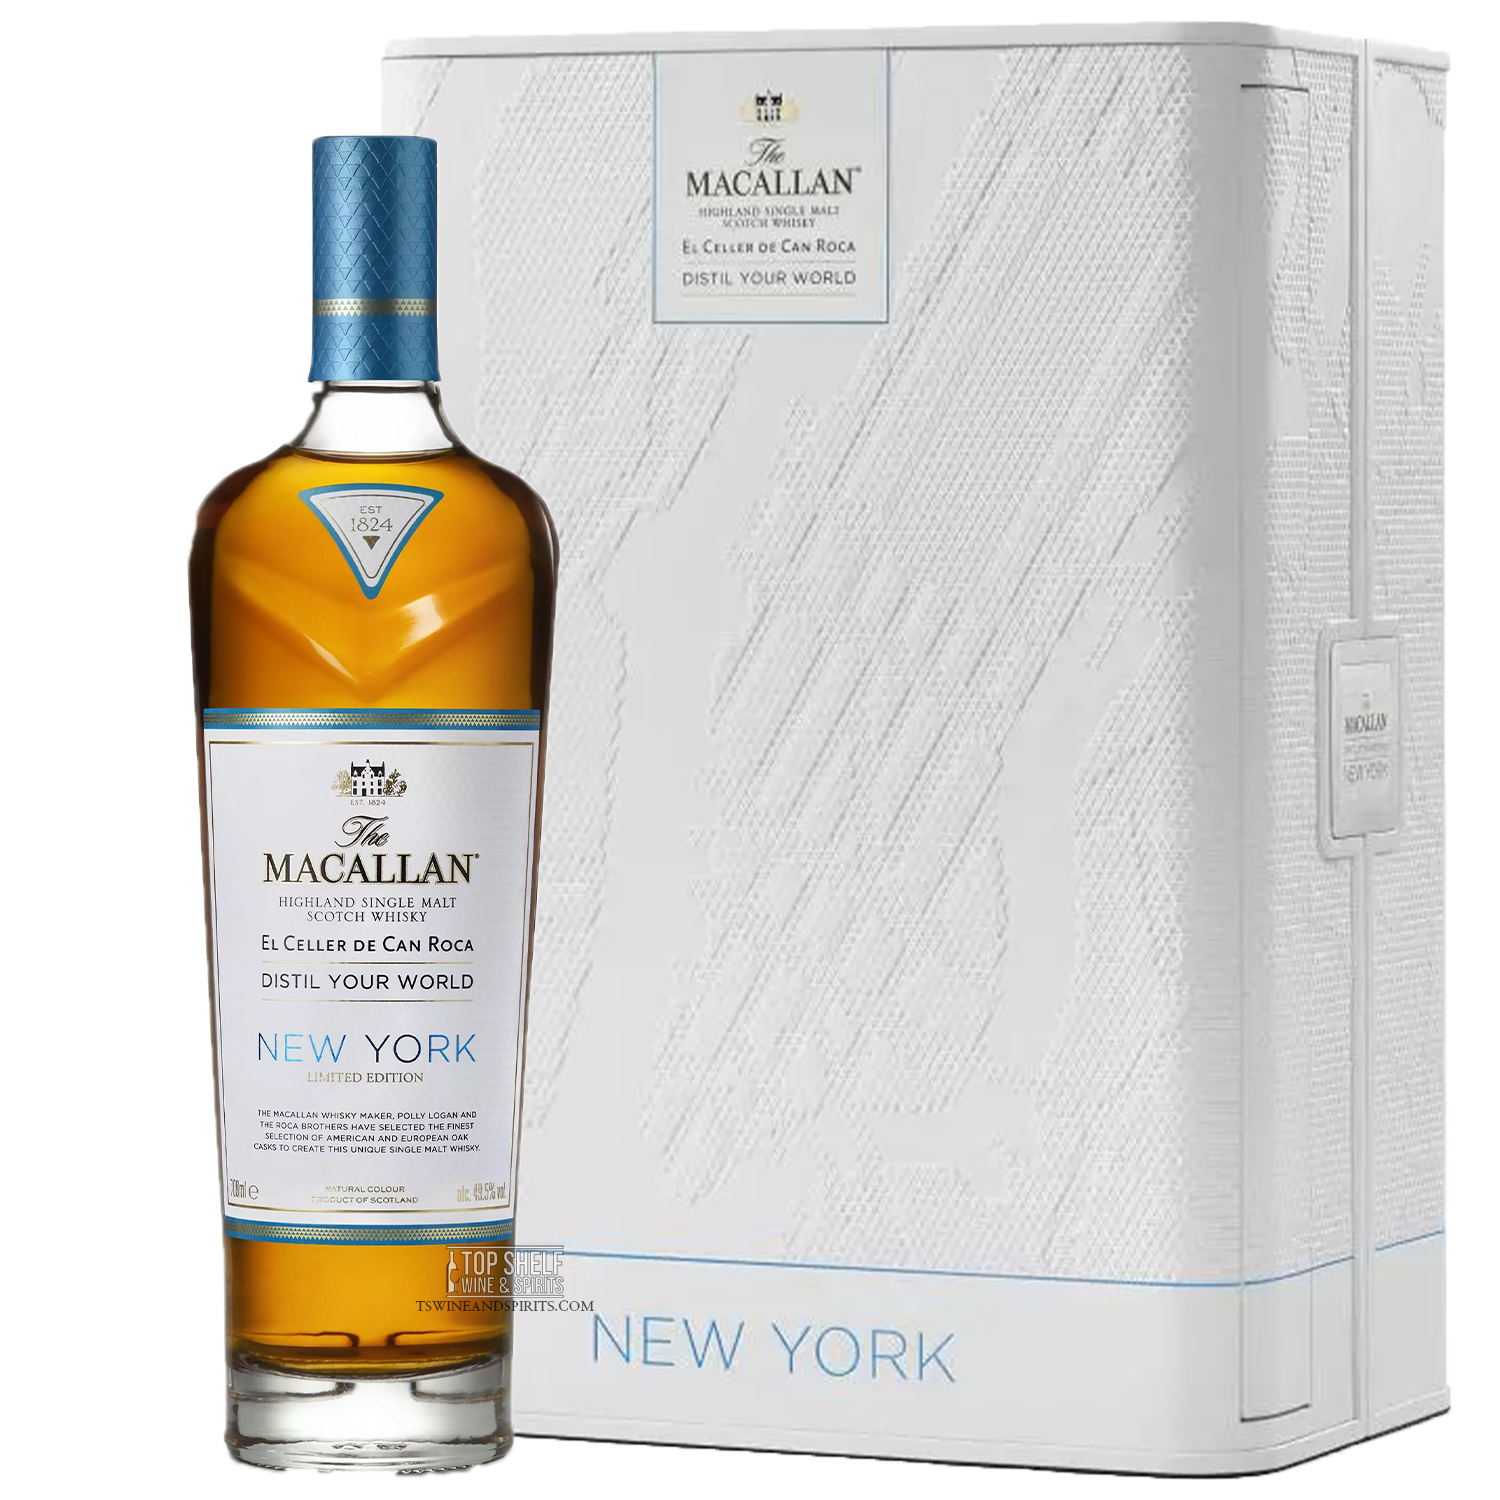 The Macallan Distil Your World New York (Limited Edition)